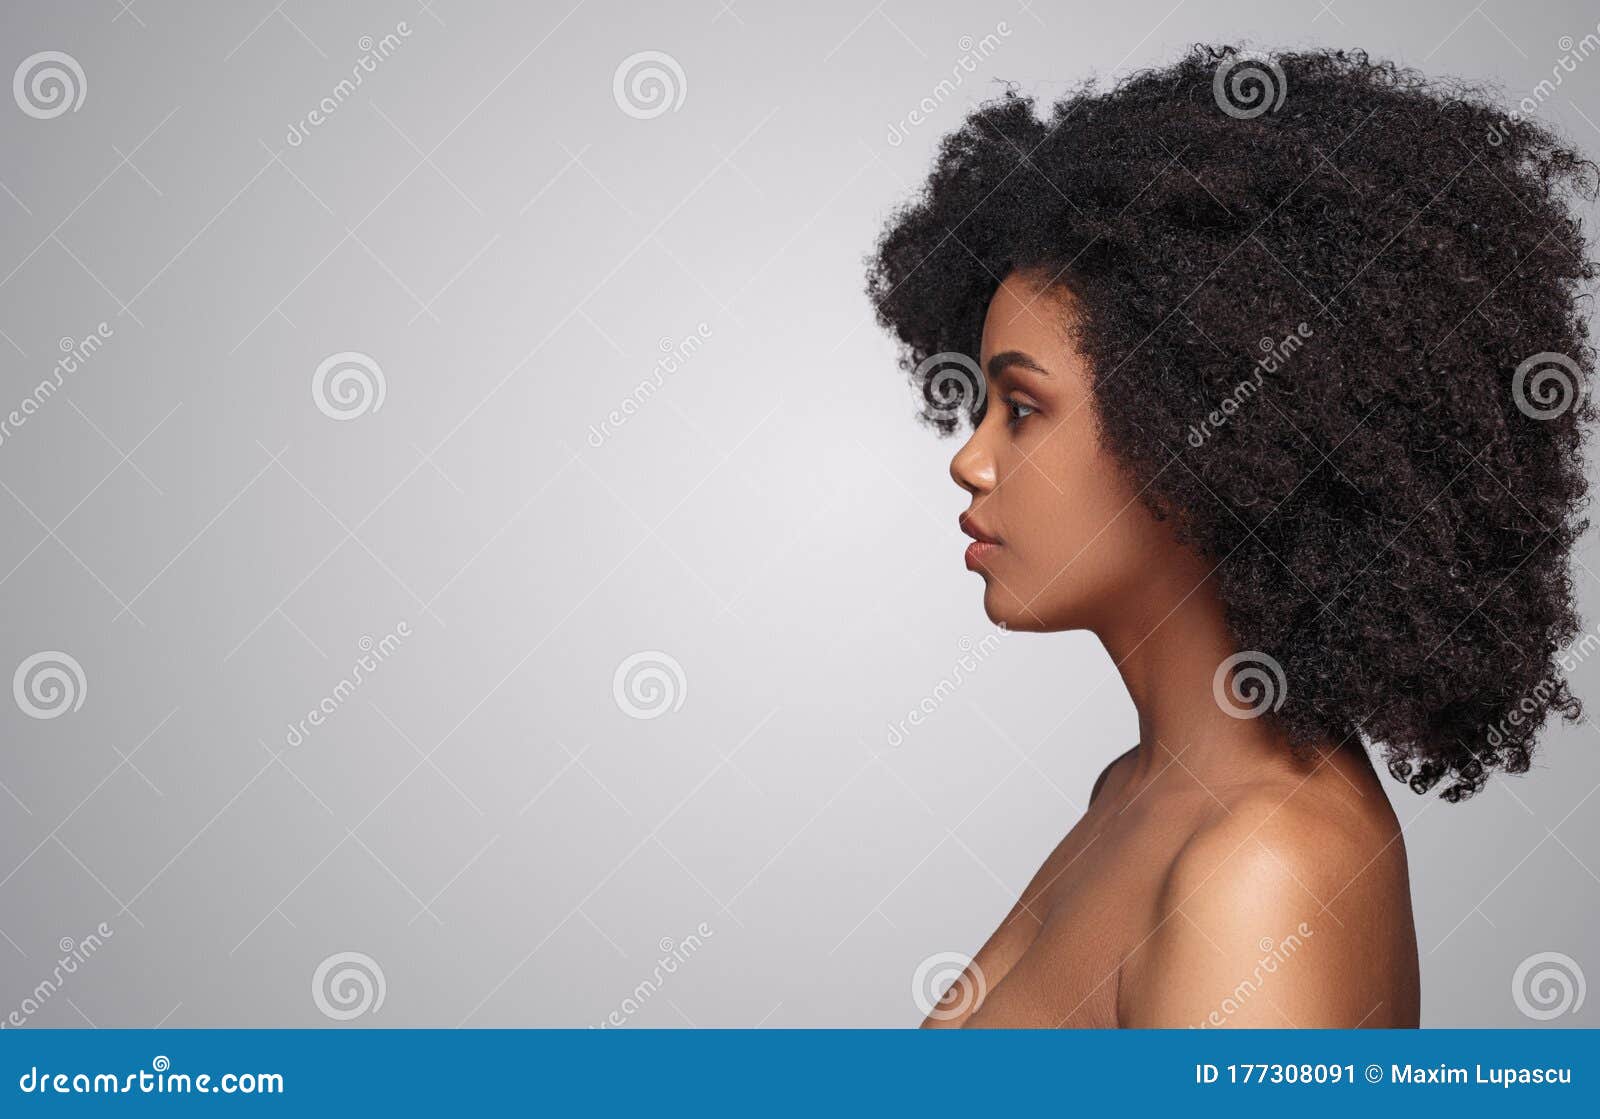 African American Female with Clean Skin Stock Image - Image of pure,  beauty: 177308091